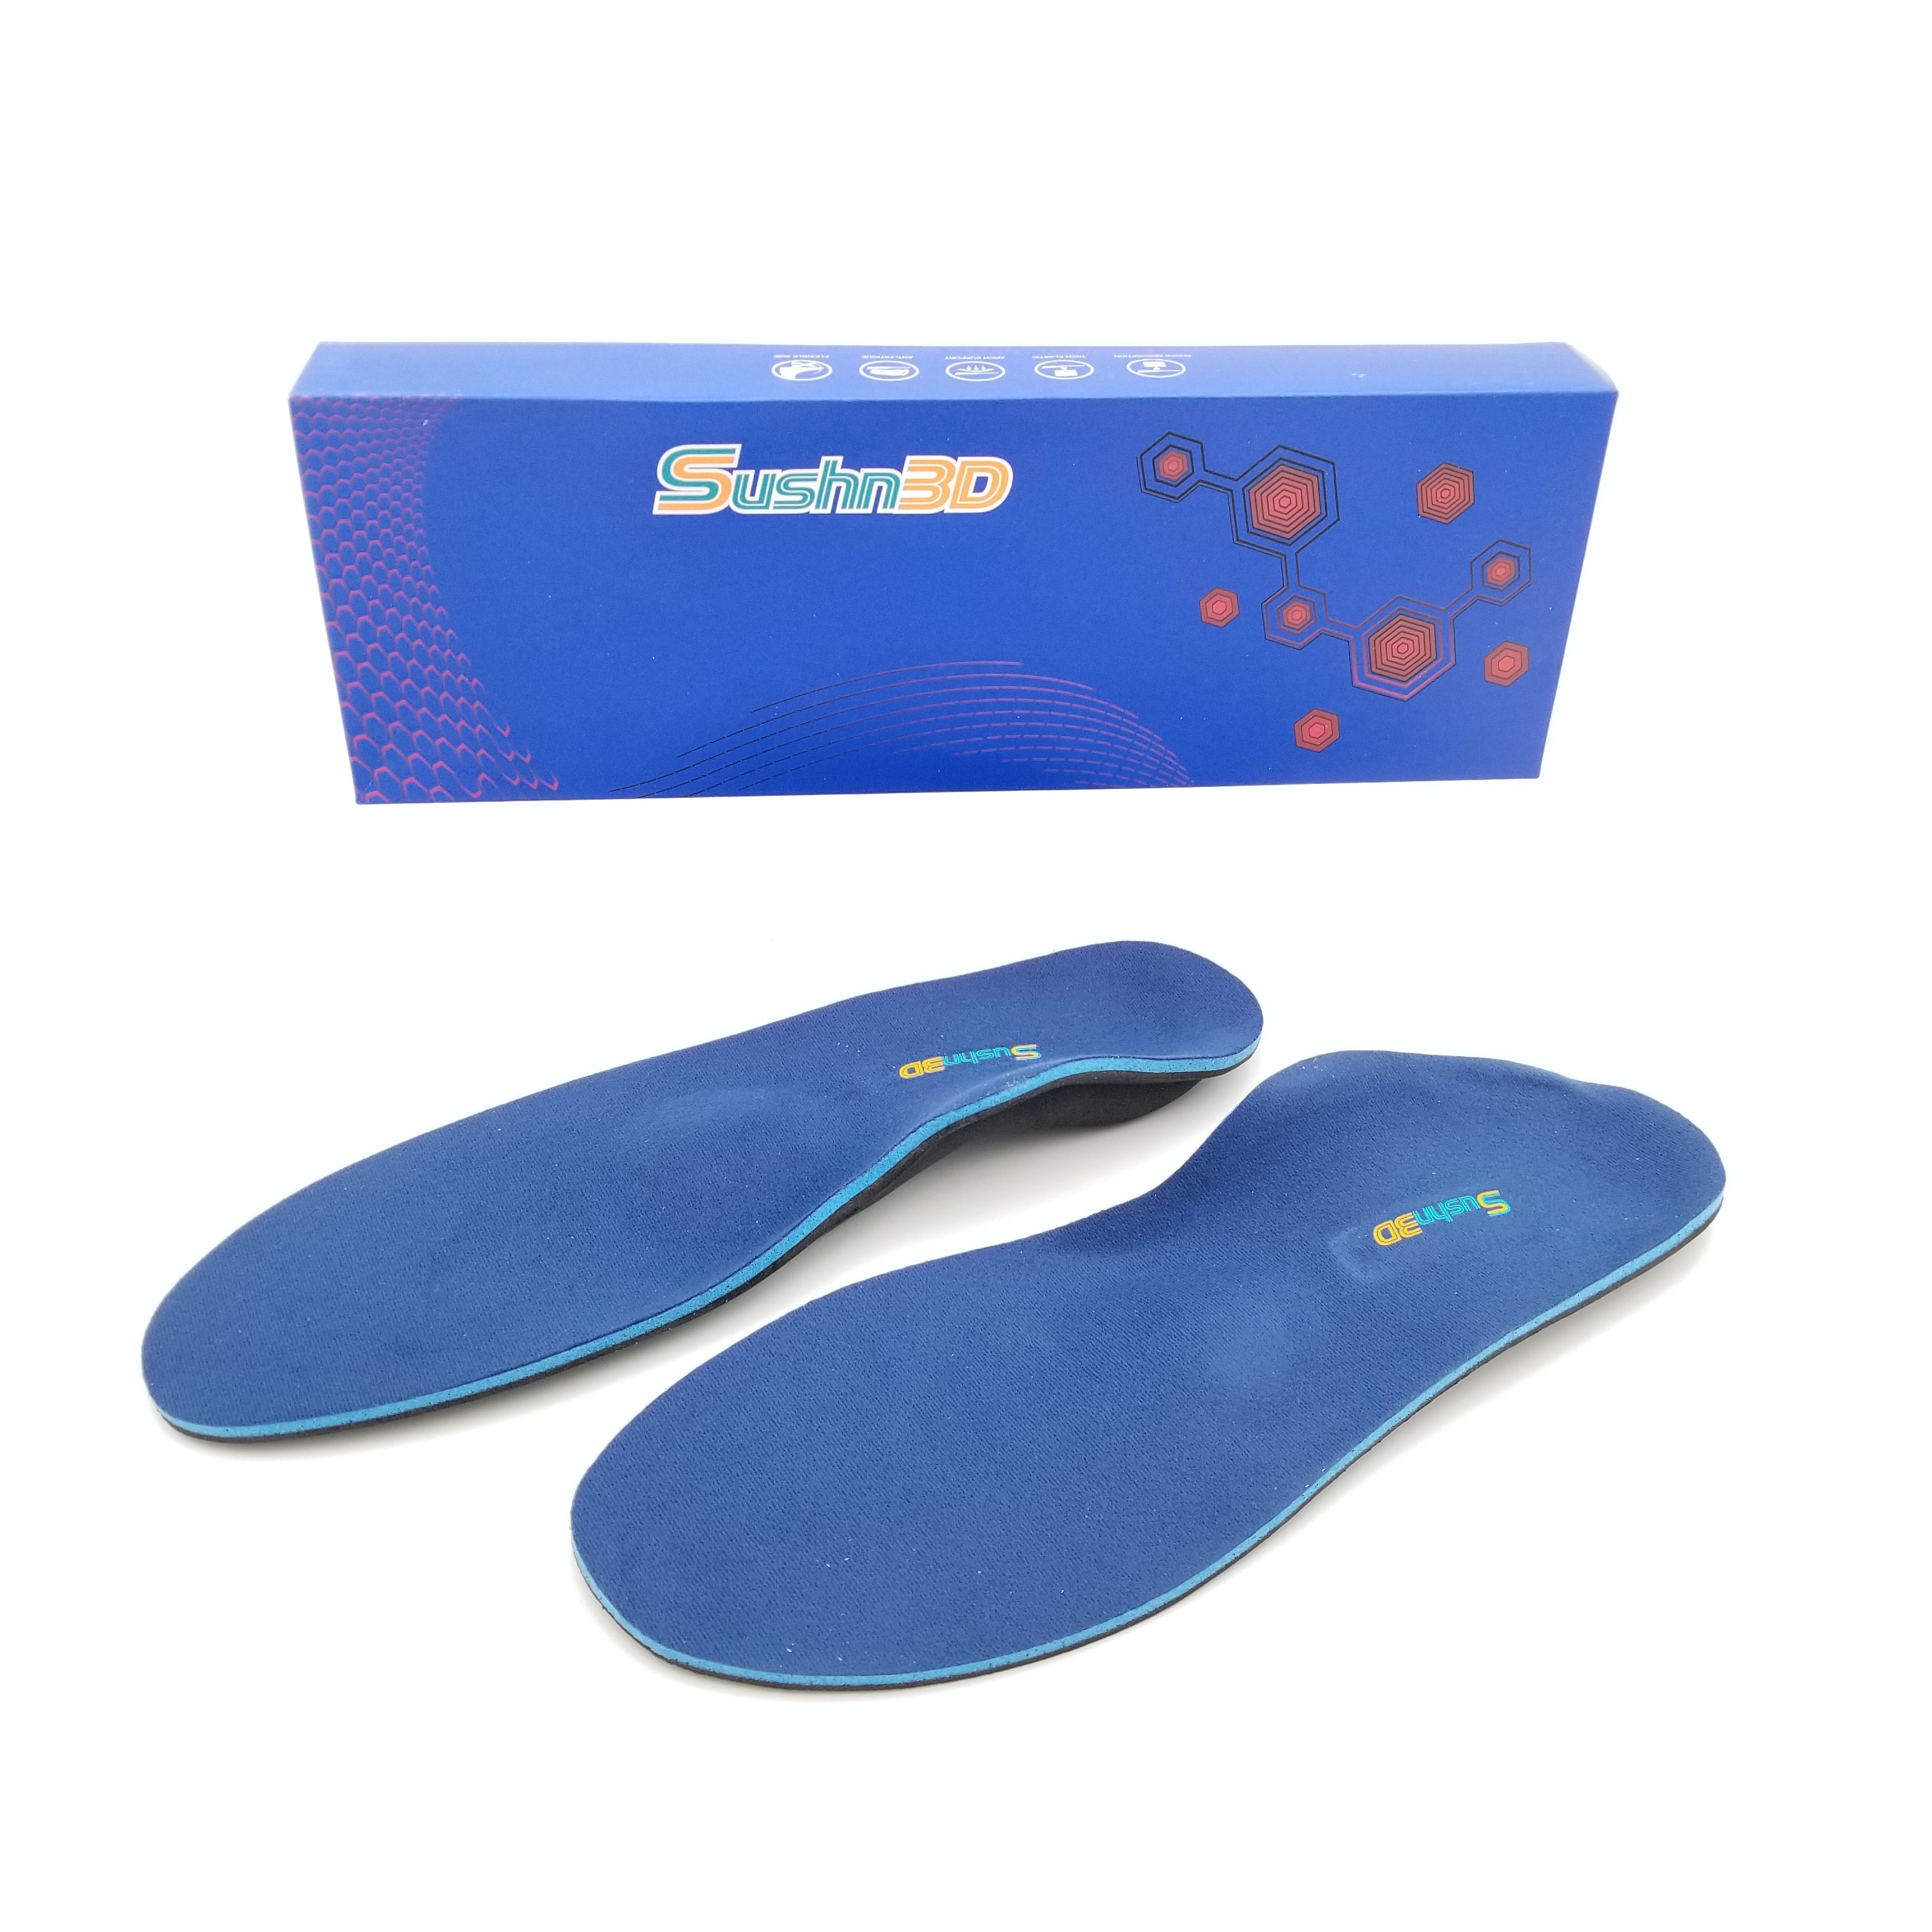 Sushn3D Orthotic Sports Shoe Insoles with Hard Arch Support -XL